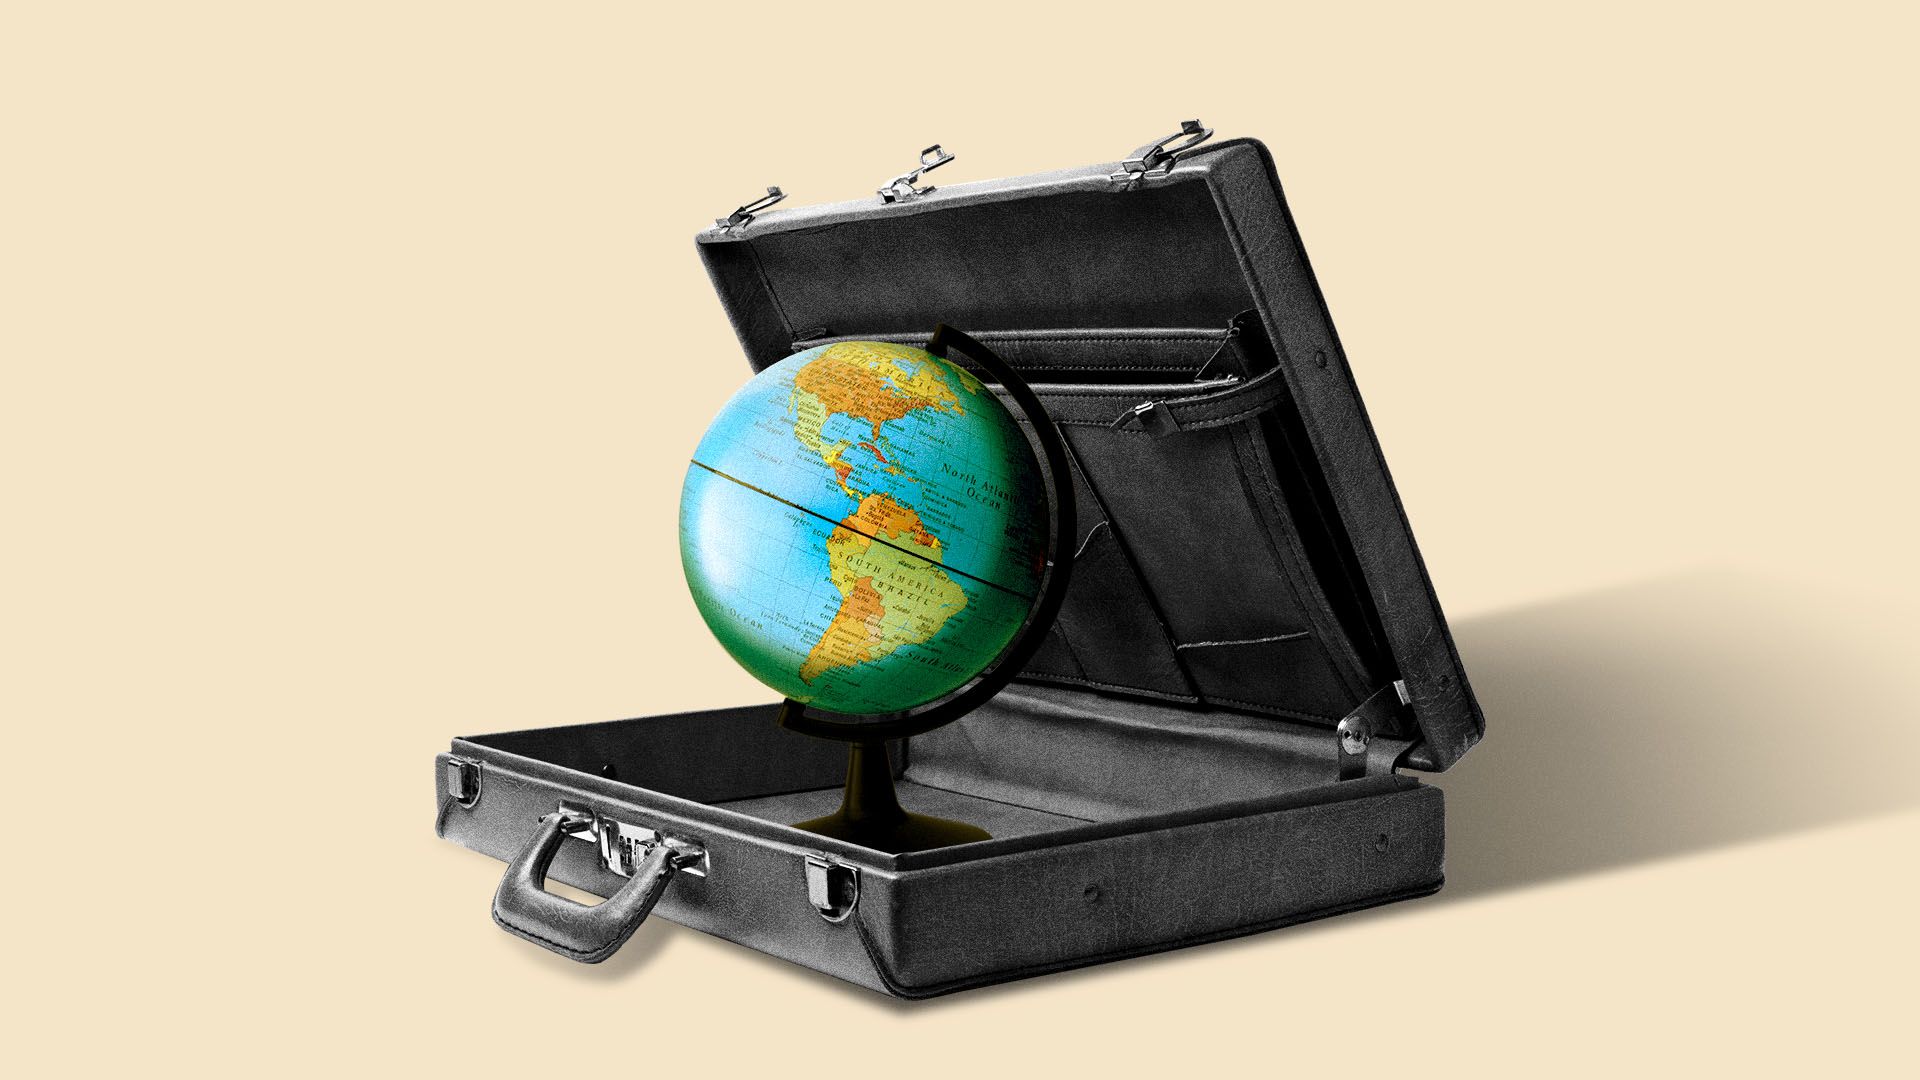 Illustration of an open briefcase with a globe inside.